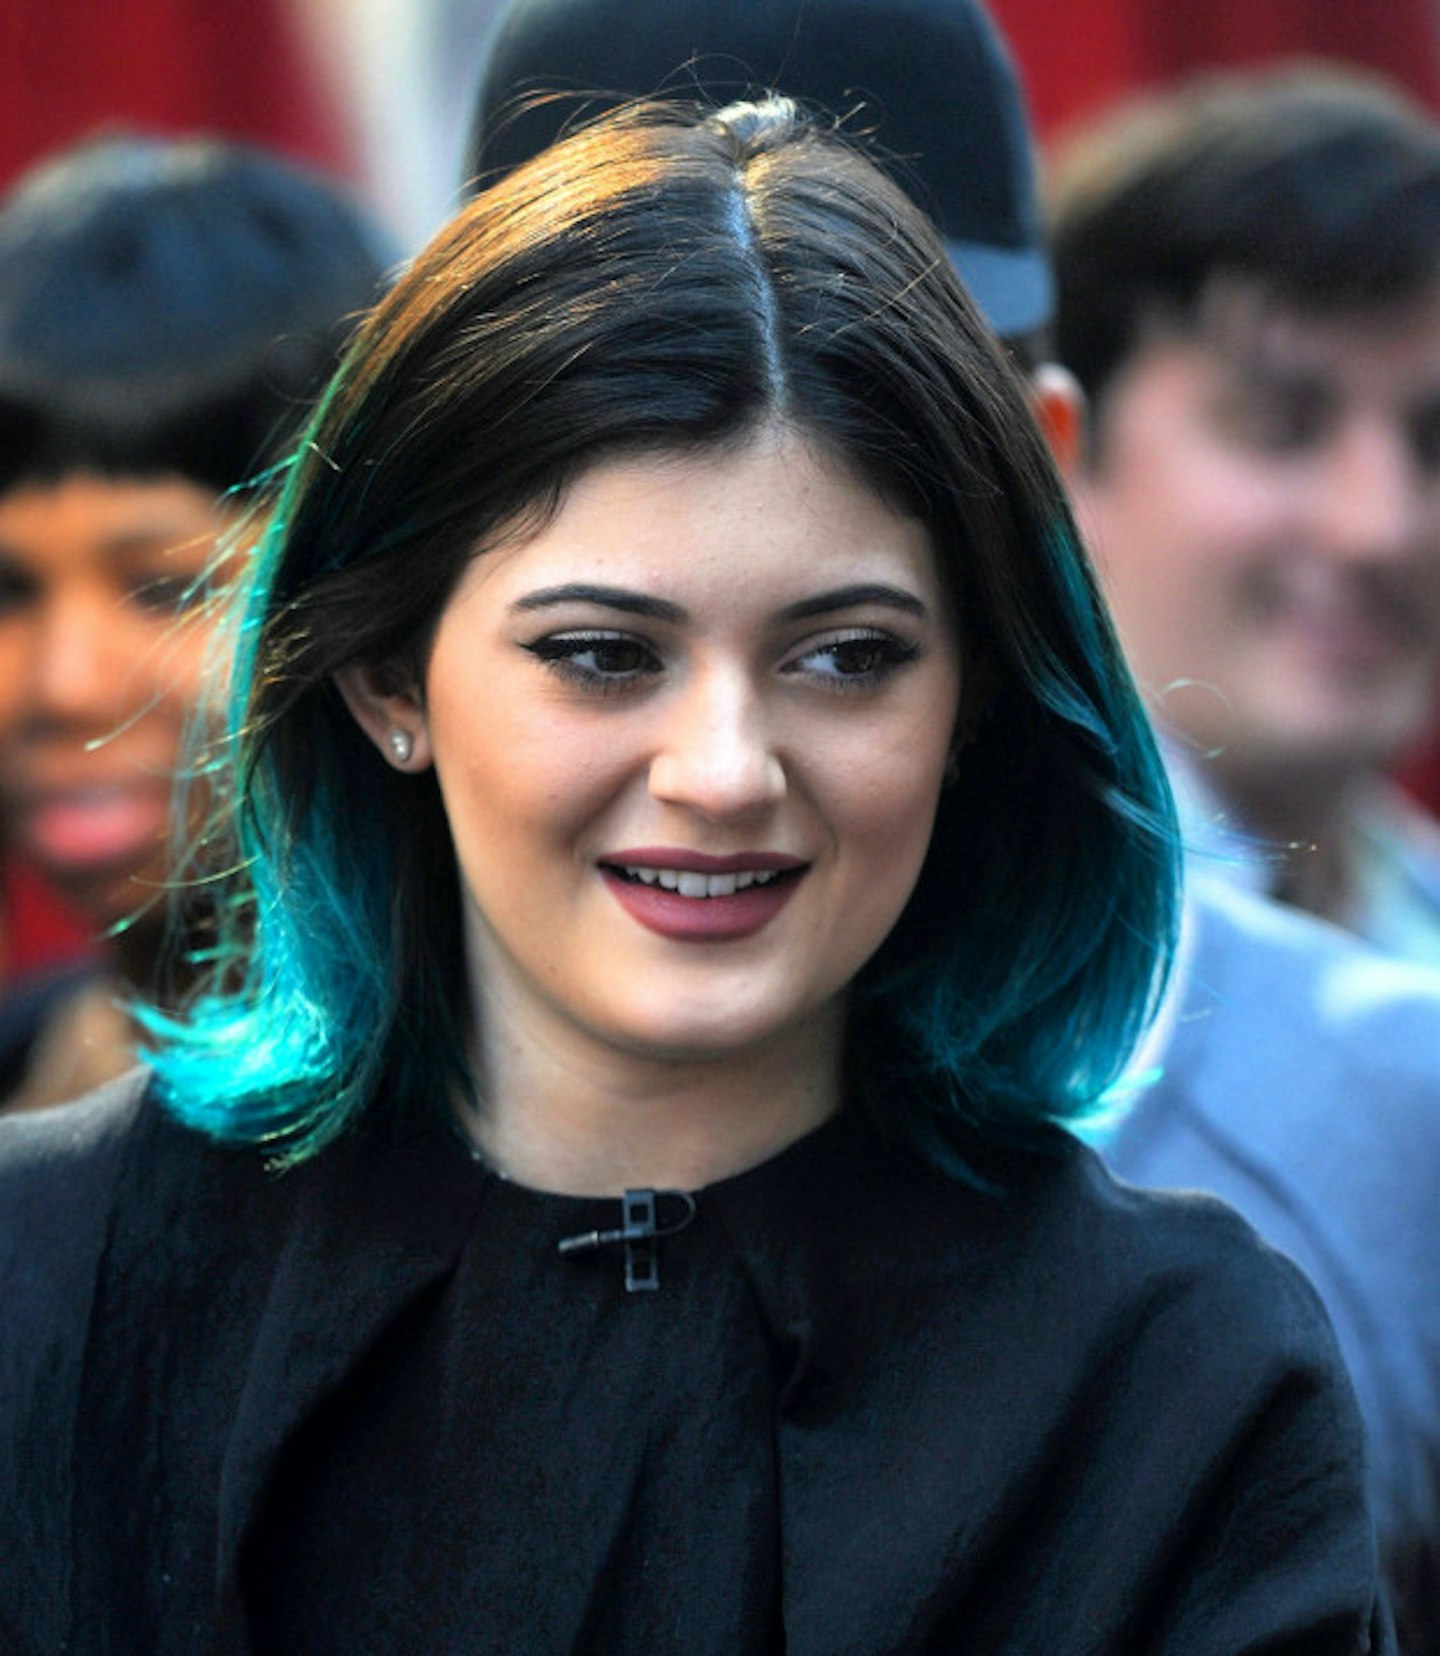 Kylie Jenner looks very different than she did a few years ago and some would say that plastic surgery, Botox, and implants have played a role in the transformation.